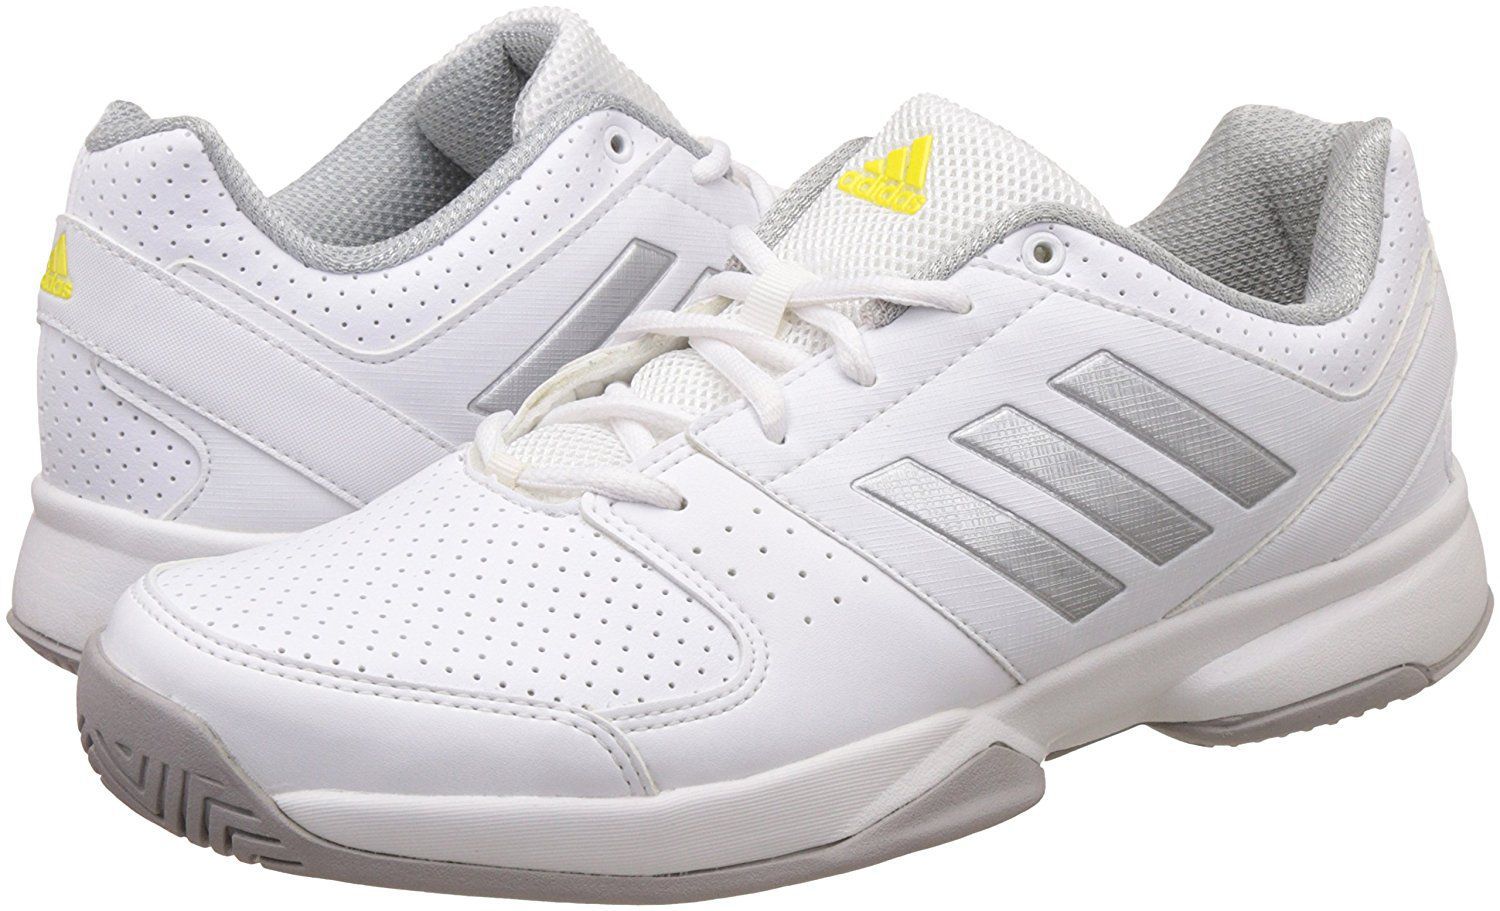 Adidas White Tennis Shoes - Buy Adidas White Tennis Shoes Online at